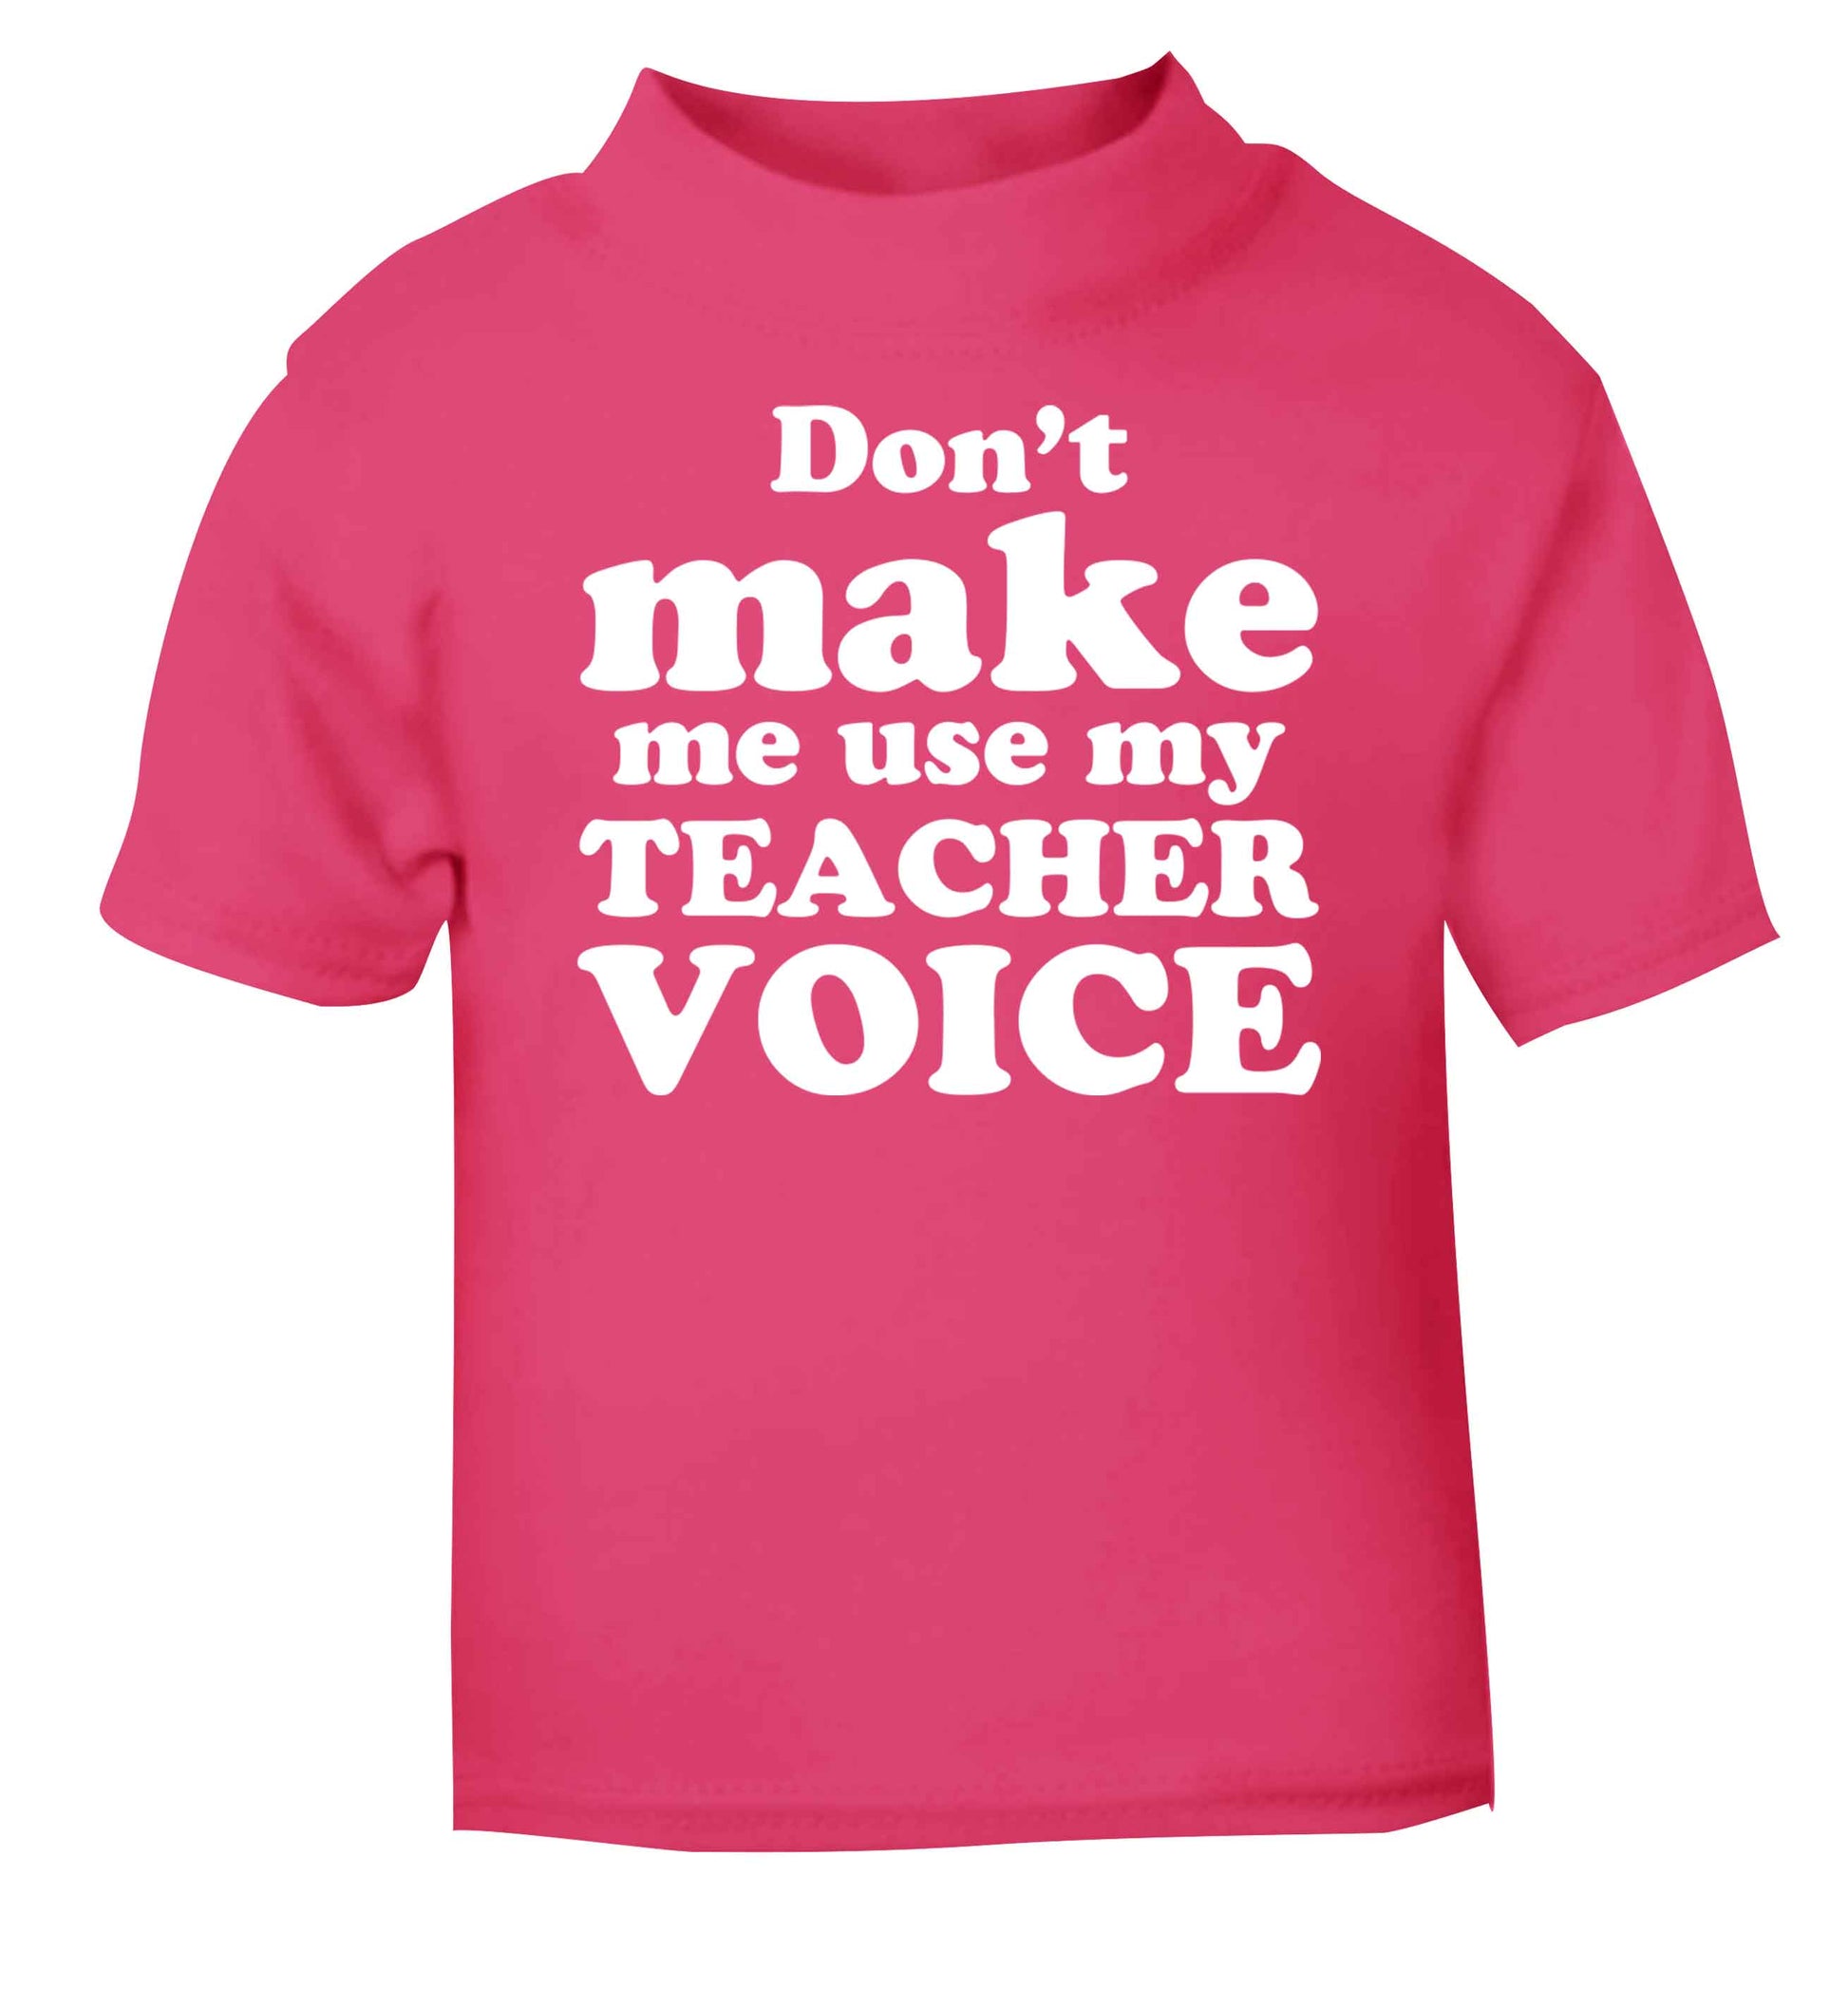 Don't make me use my teacher voice pink baby toddler Tshirt 2 Years